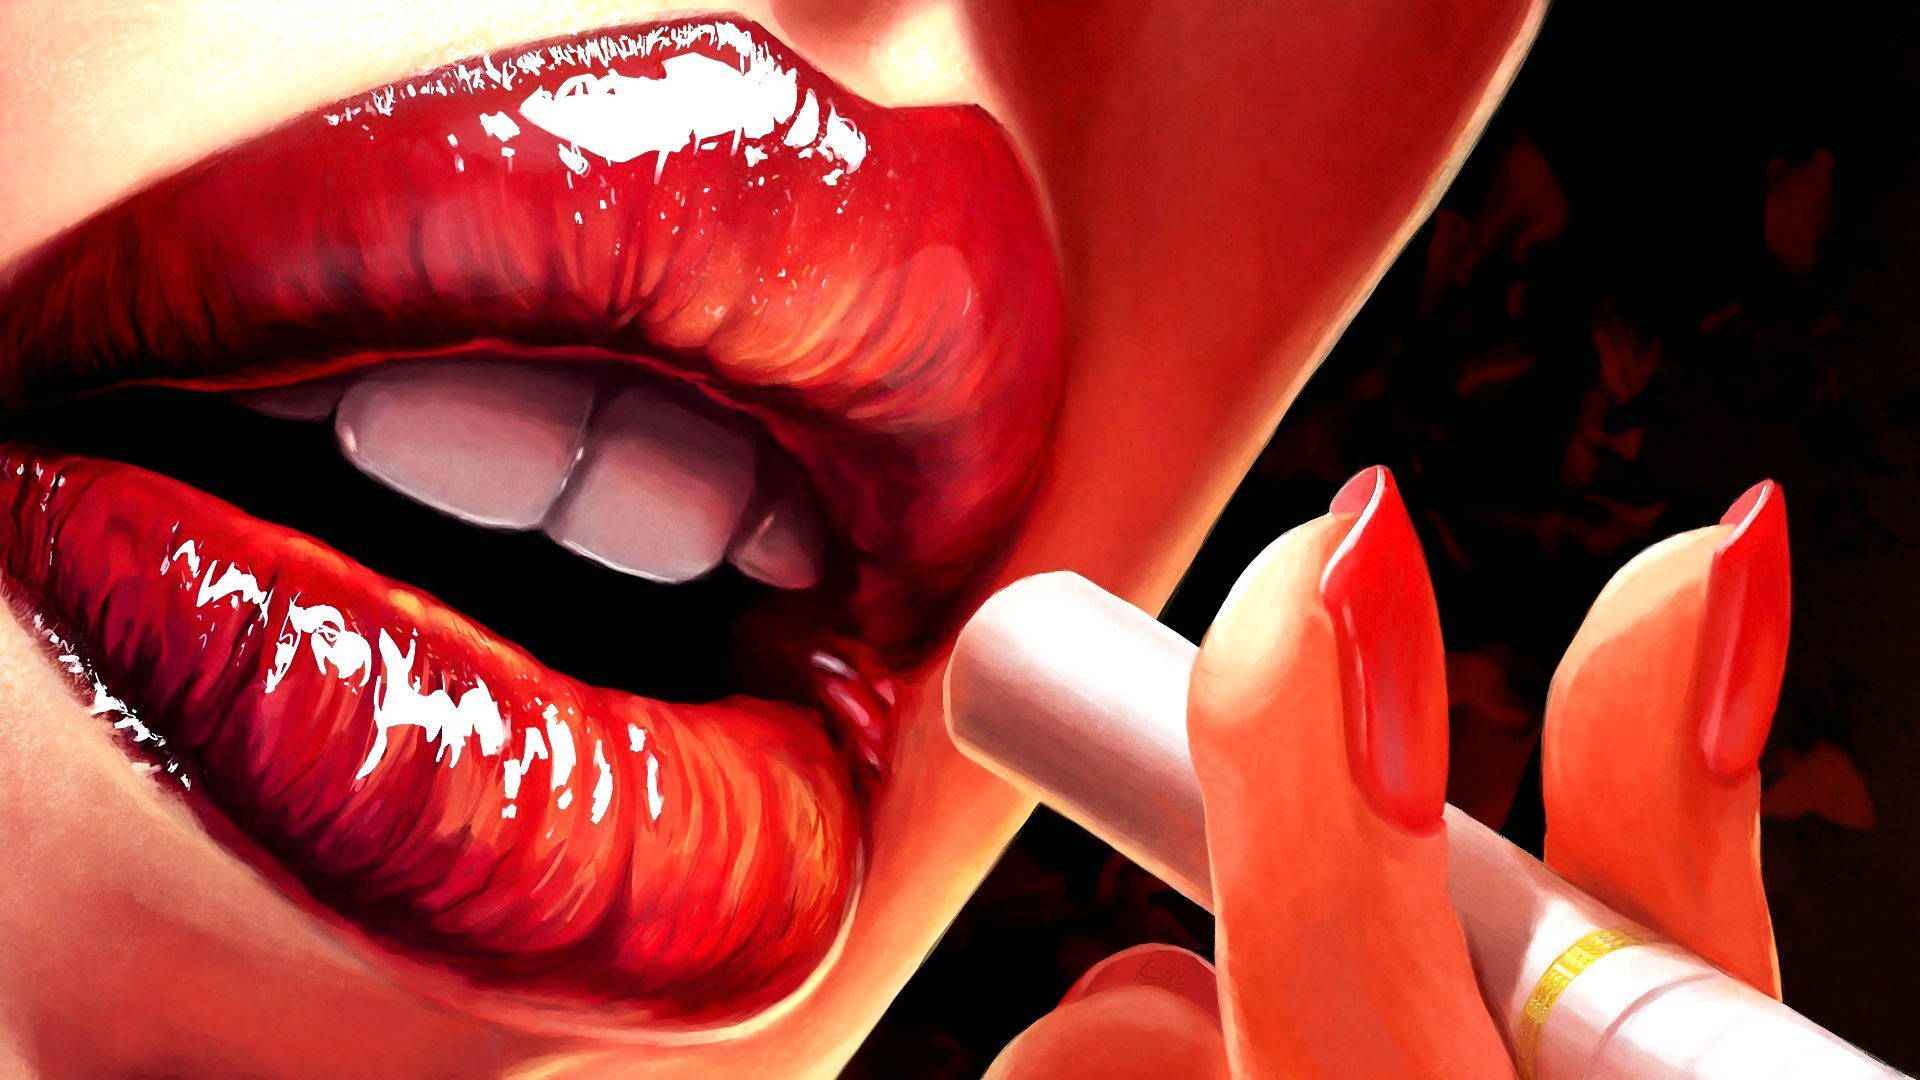 Seductive Red Glossy Lips Holding a Cigarette Wallpaper